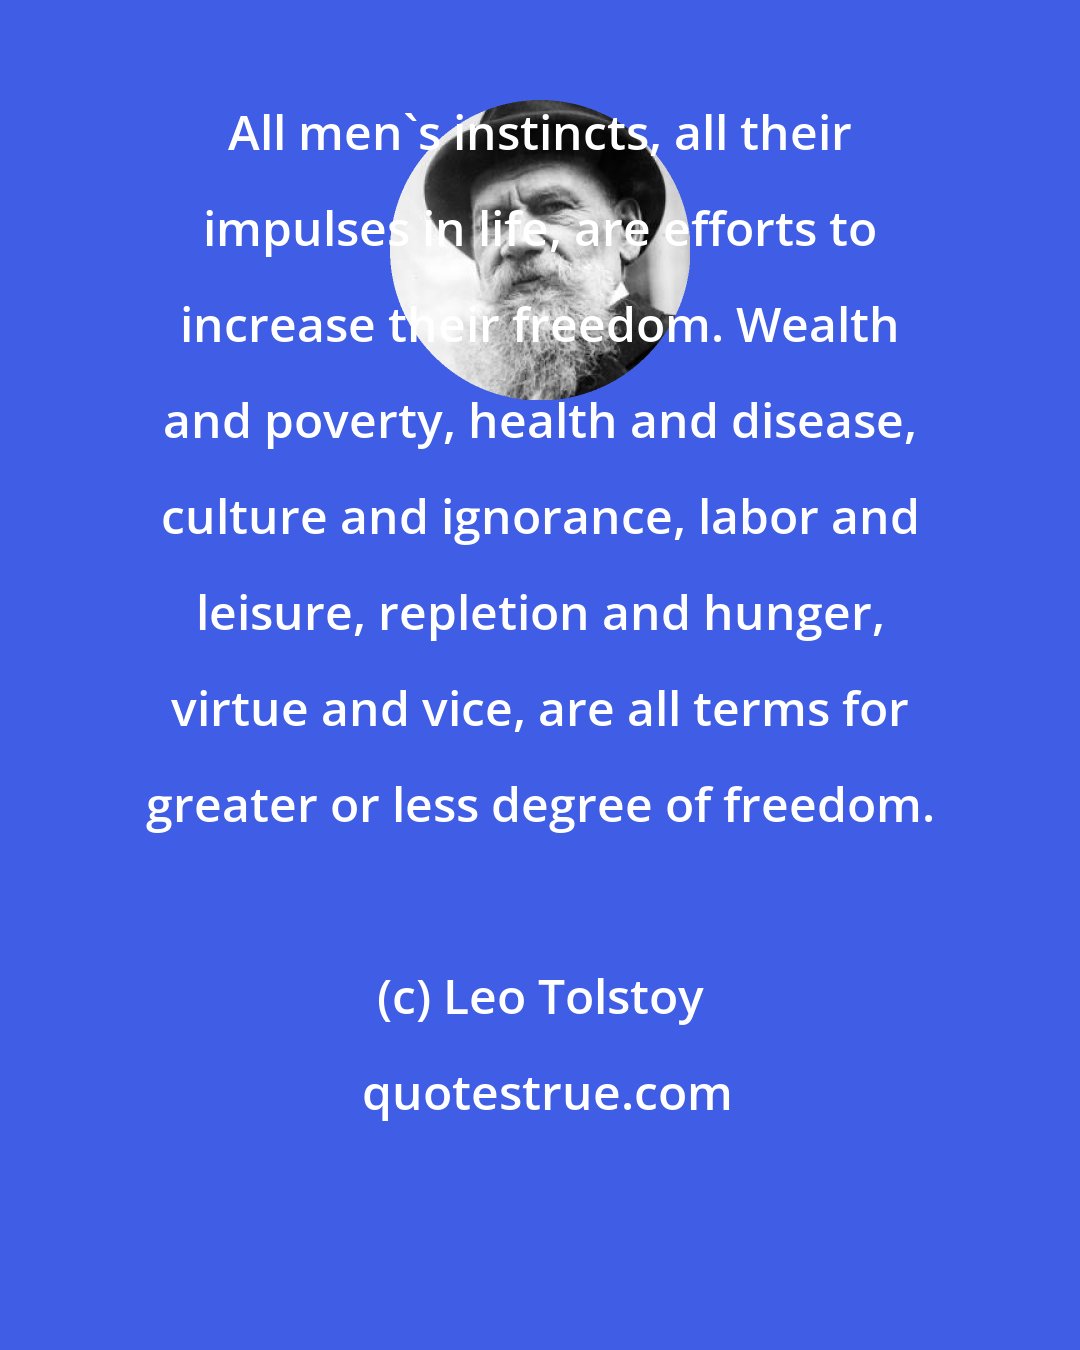 Leo Tolstoy: All men's instincts, all their impulses in life, are efforts to increase their freedom. Wealth and poverty, health and disease, culture and ignorance, labor and leisure, repletion and hunger, virtue and vice, are all terms for greater or less degree of freedom.